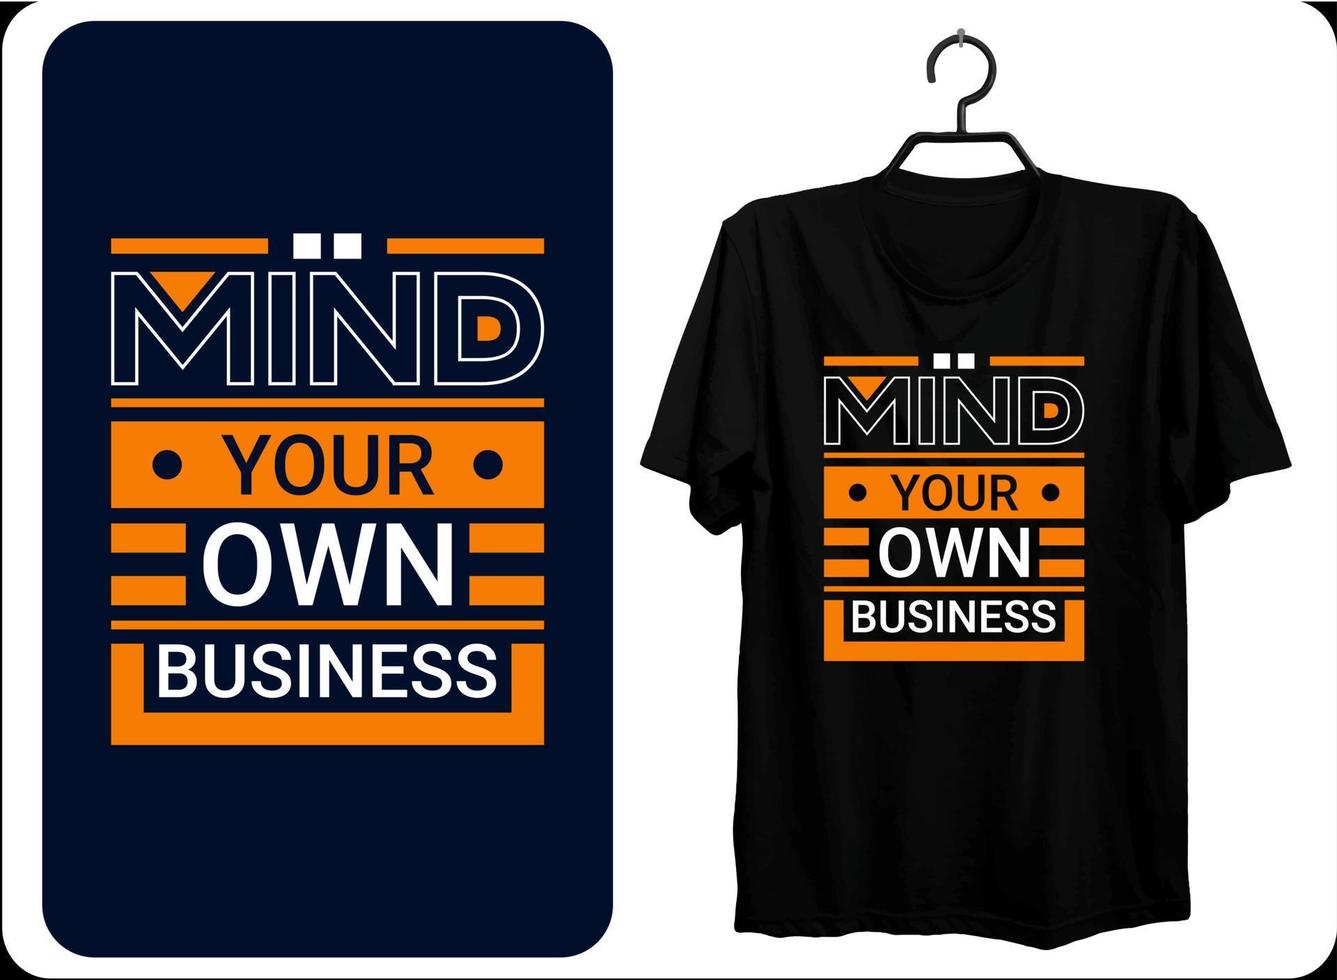 Mind your own business modern inspirational quotes t shirt design for fashion apparel printing. Suitable for totebags, stickers, mug, hat, and merchandise EPS File Format vector